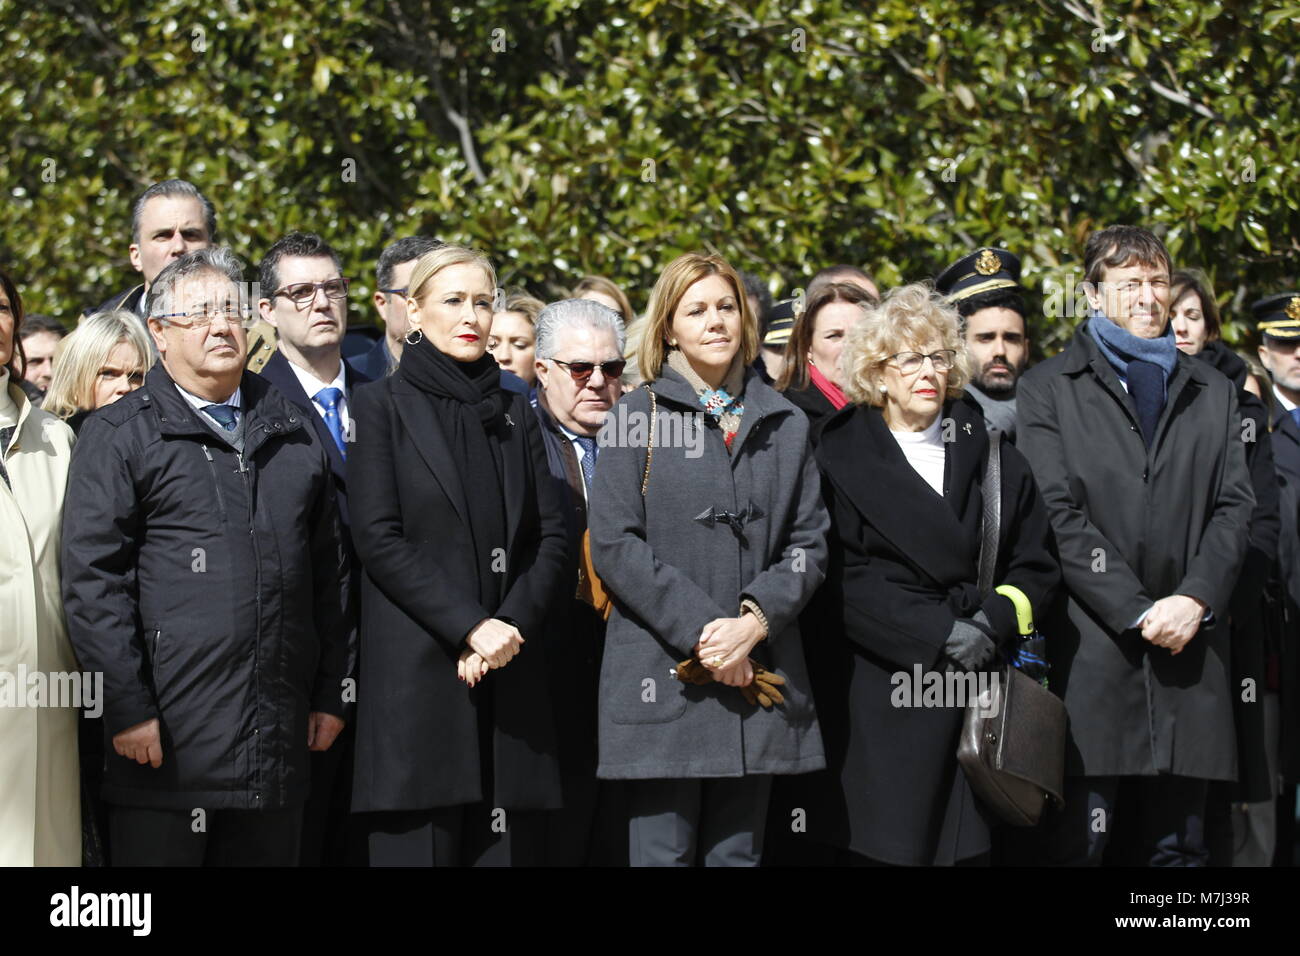 Madrid, Spain. 11th March, 2018.President of the Community of Madrid, Cristina Cifuentes, politicans Juan Ignacio Zoido, Maria Dolores de Cospedal, Manuela Carmena during a tribute in memory of the victims of the attack of 11-M 2004, at the forest of the Retiro Park on Sunday 11 March 2018. Credit: Gtres Información más Comuniación on line, S.L./Alamy Live News Stock Photo